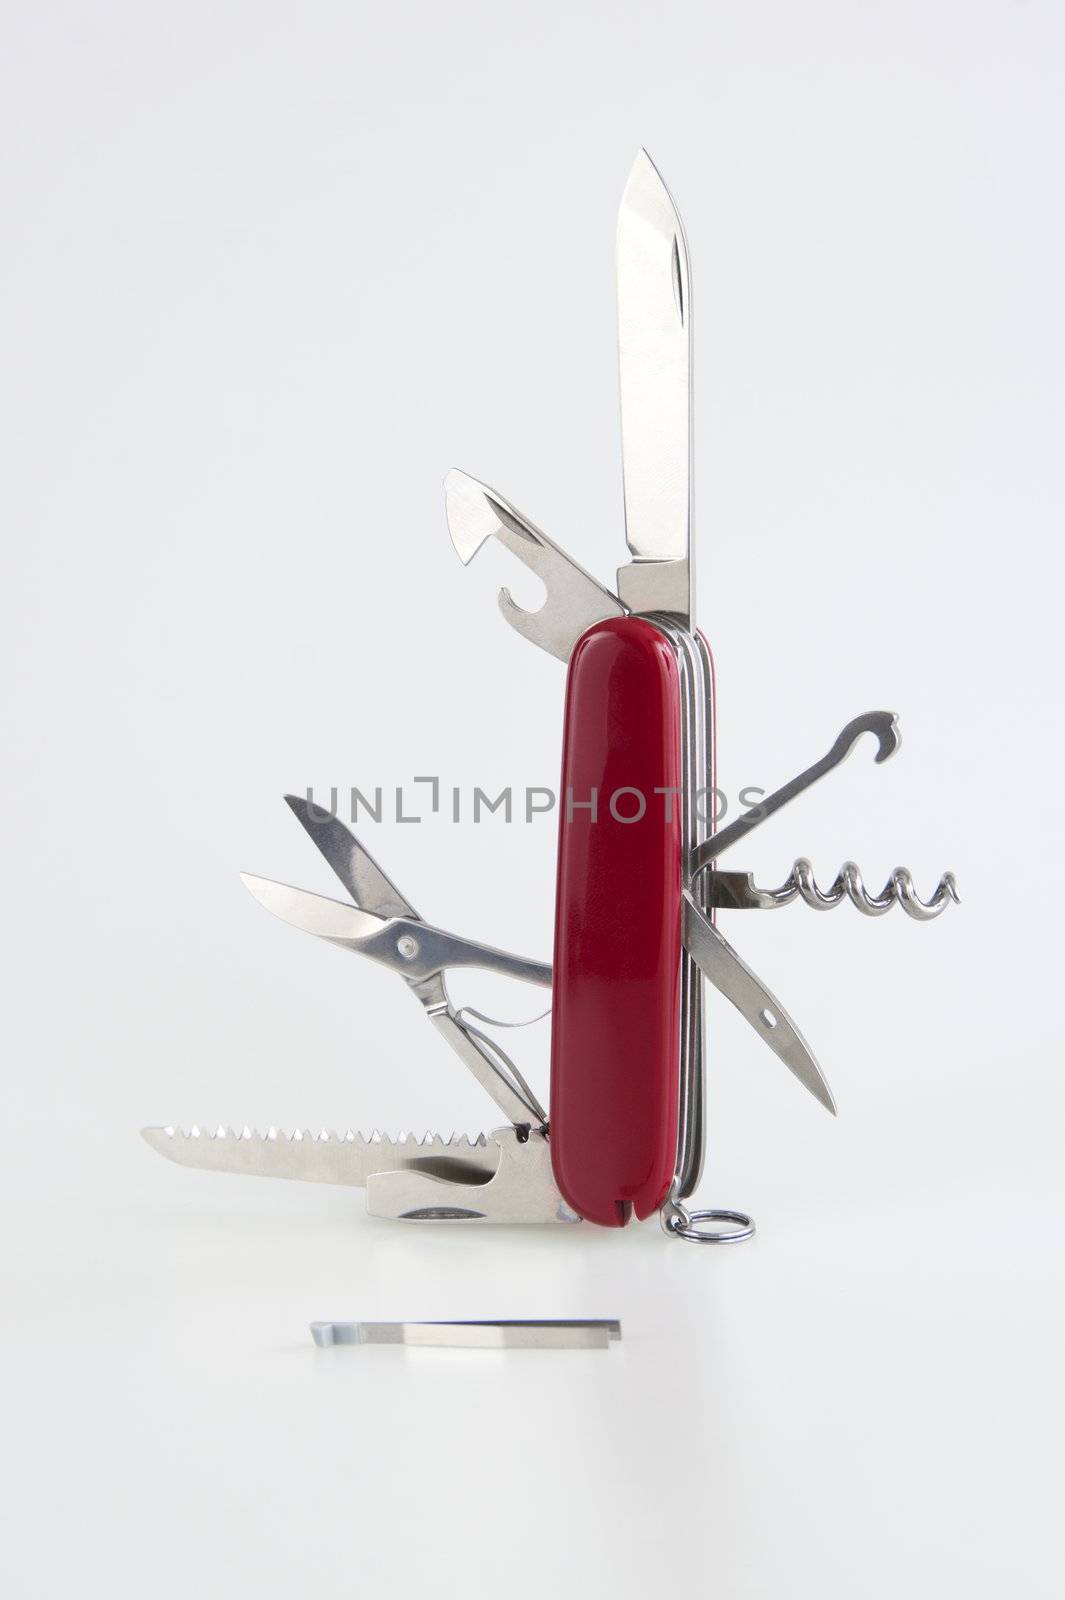 standing Swiss army knife with multiple tools available